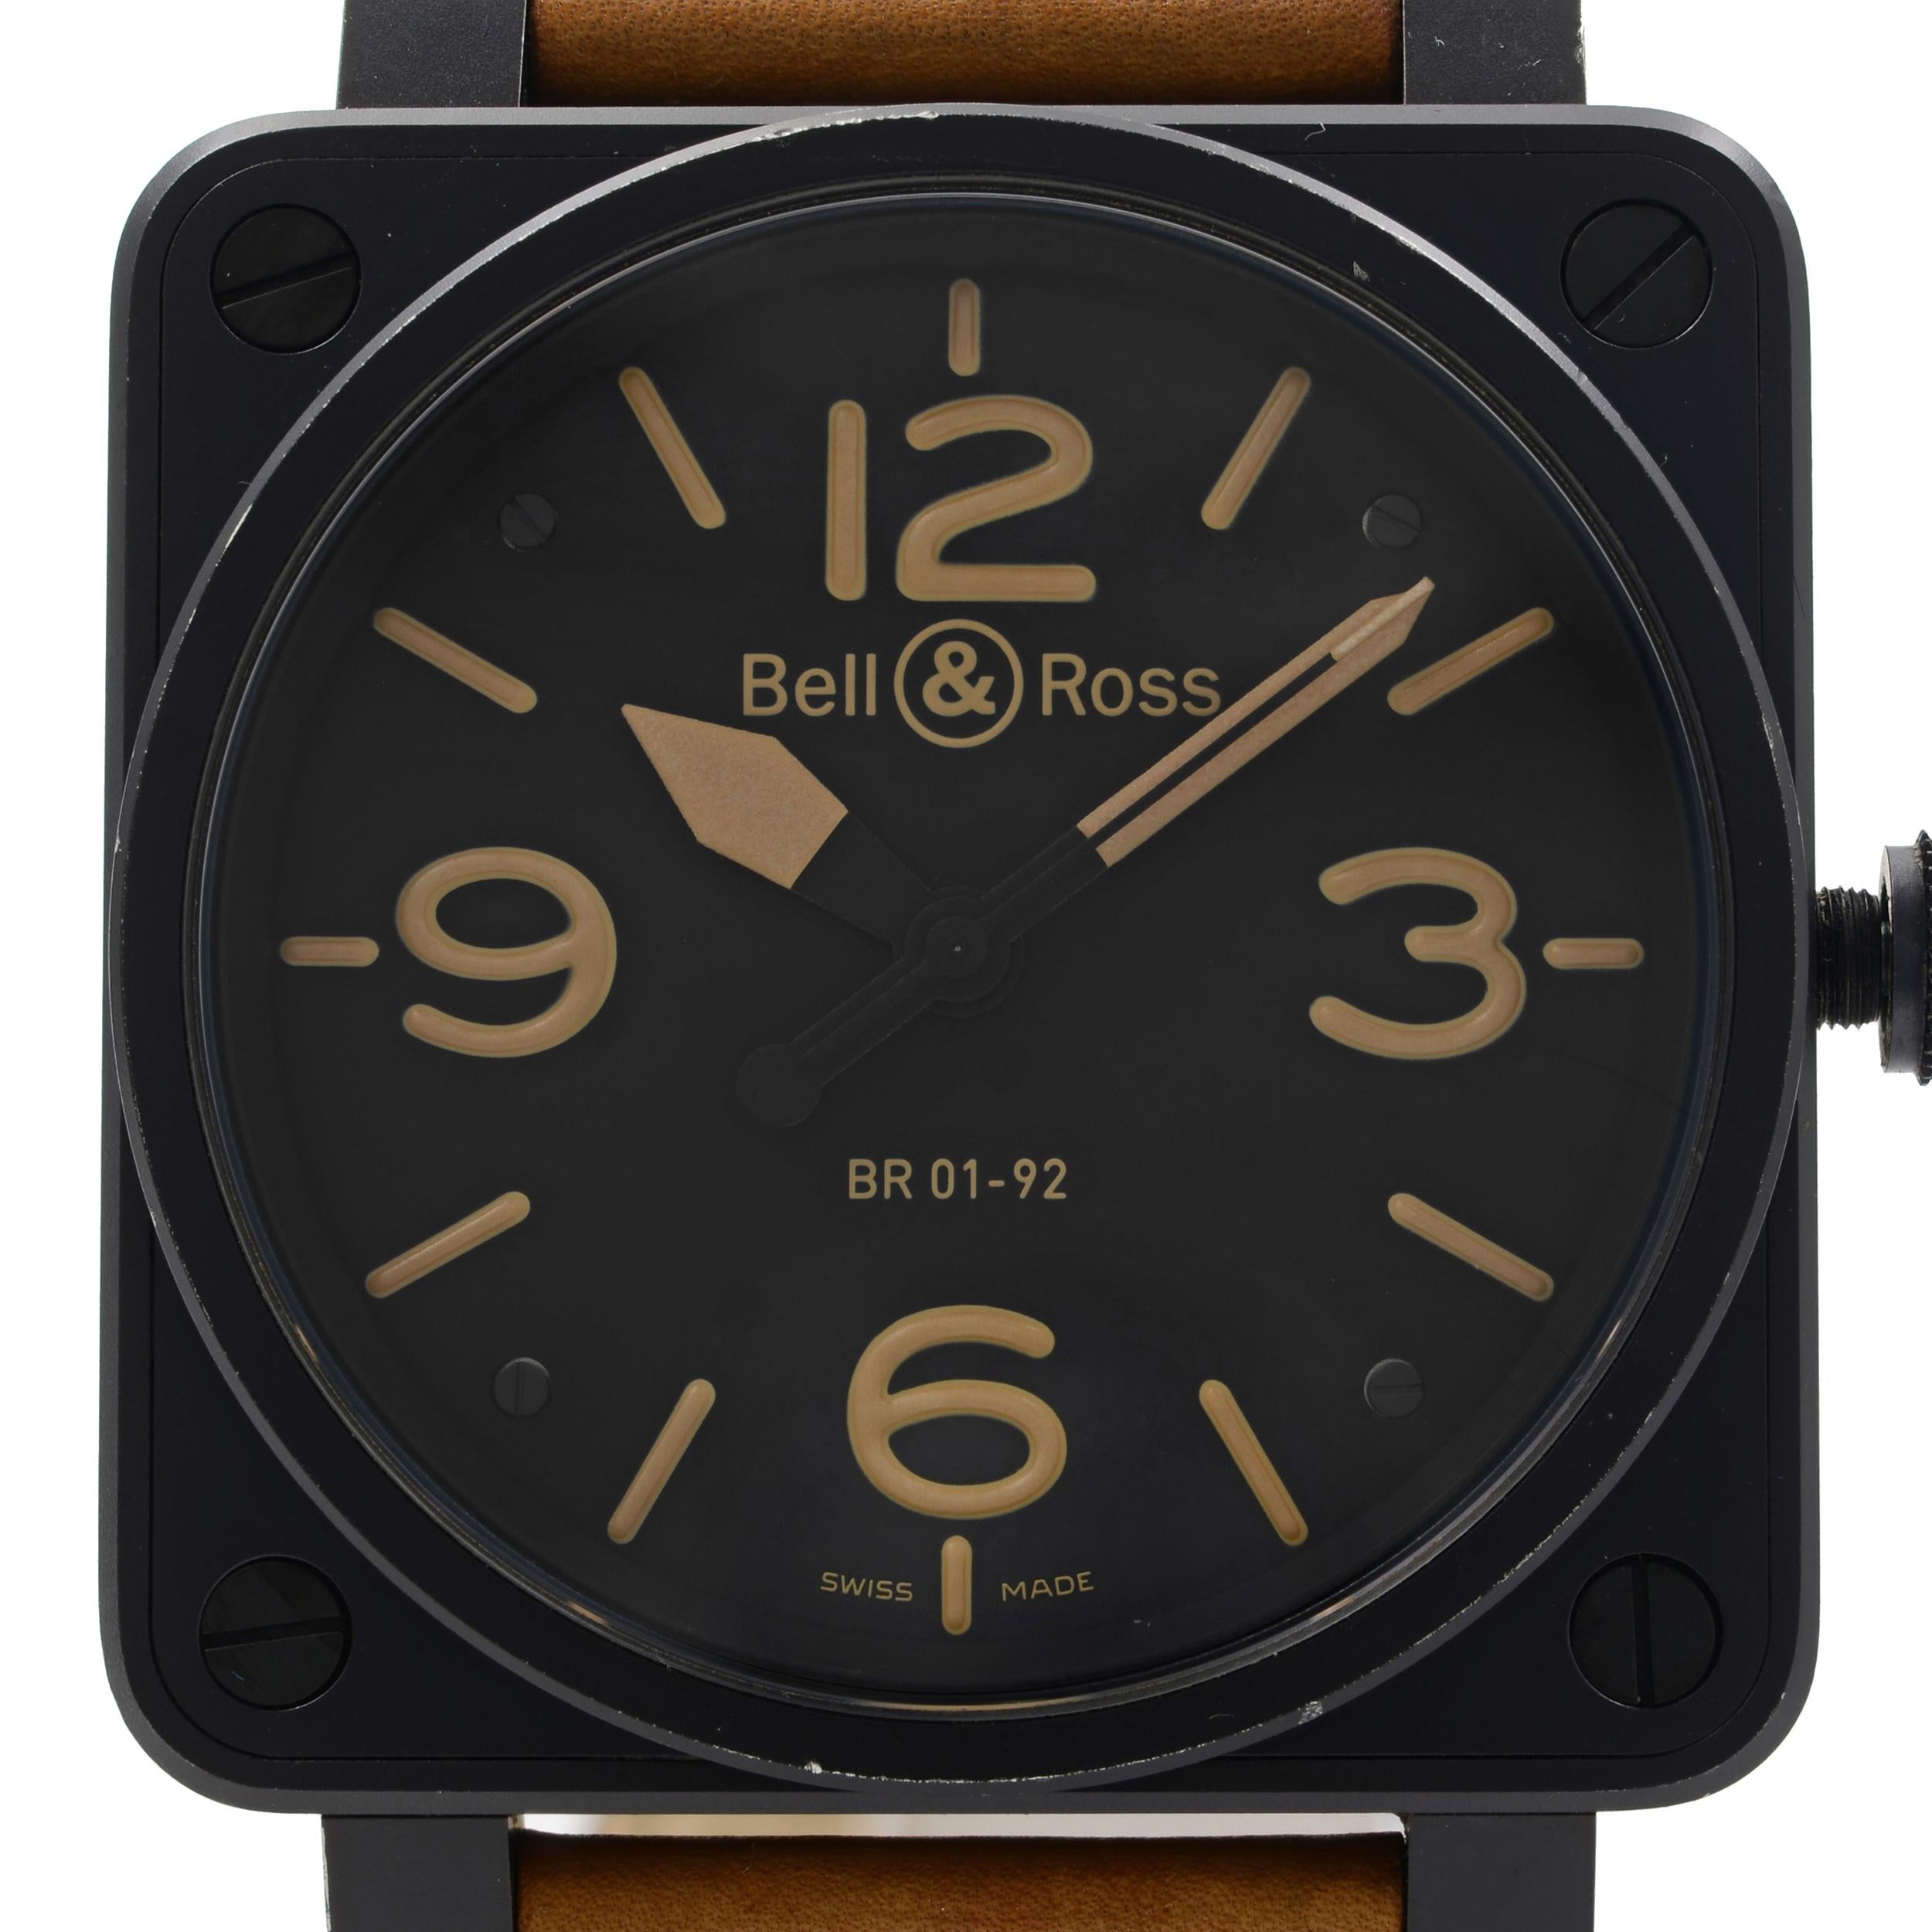 The case and bezel of this watch have some blemishes on black PVD surfaces and the strap of this watch has some minor signs of wear as visible on pictures. This watch comes with extra detachable Bell & Ross original unworn canvas strap. This watch